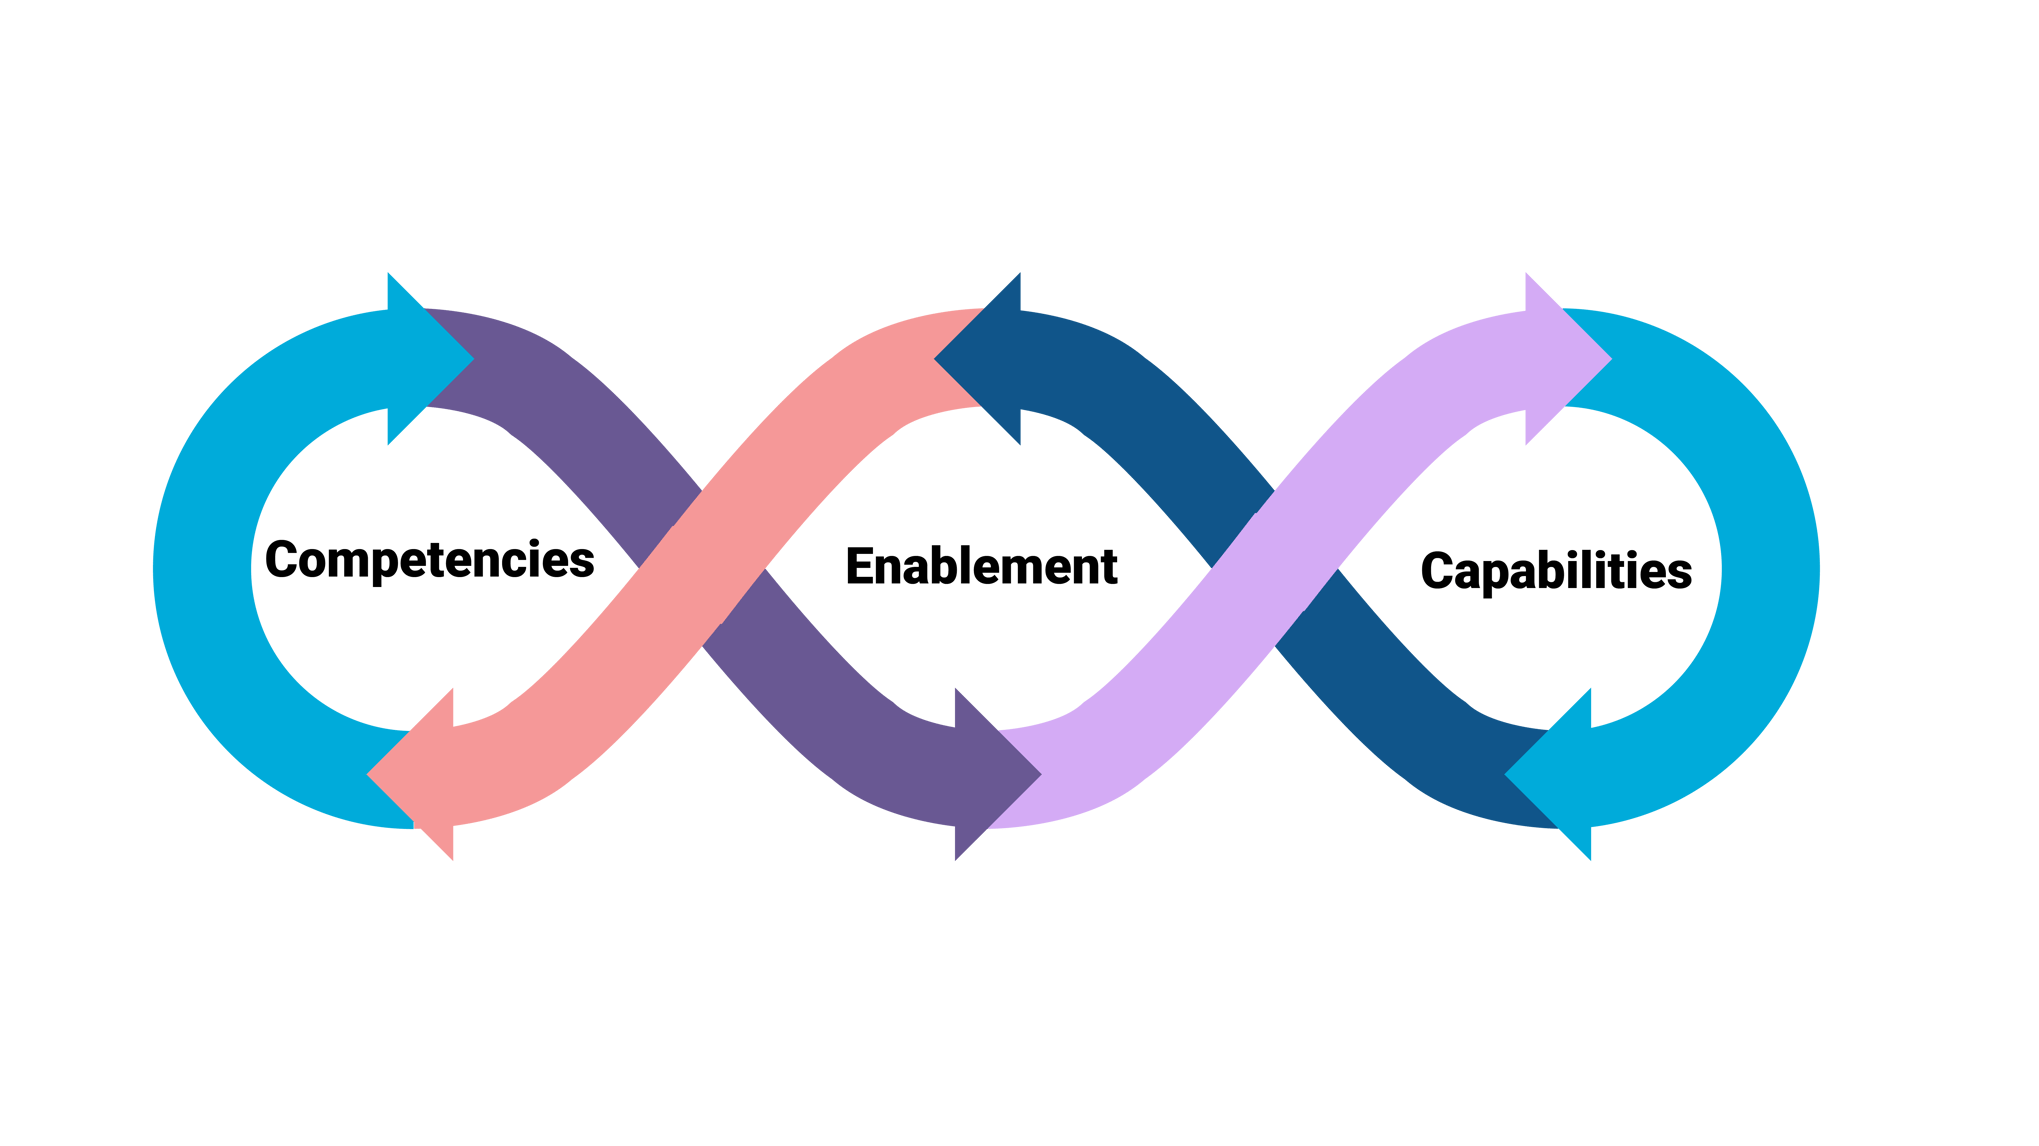 Competencies, Capabilities & Enabalement are Connected